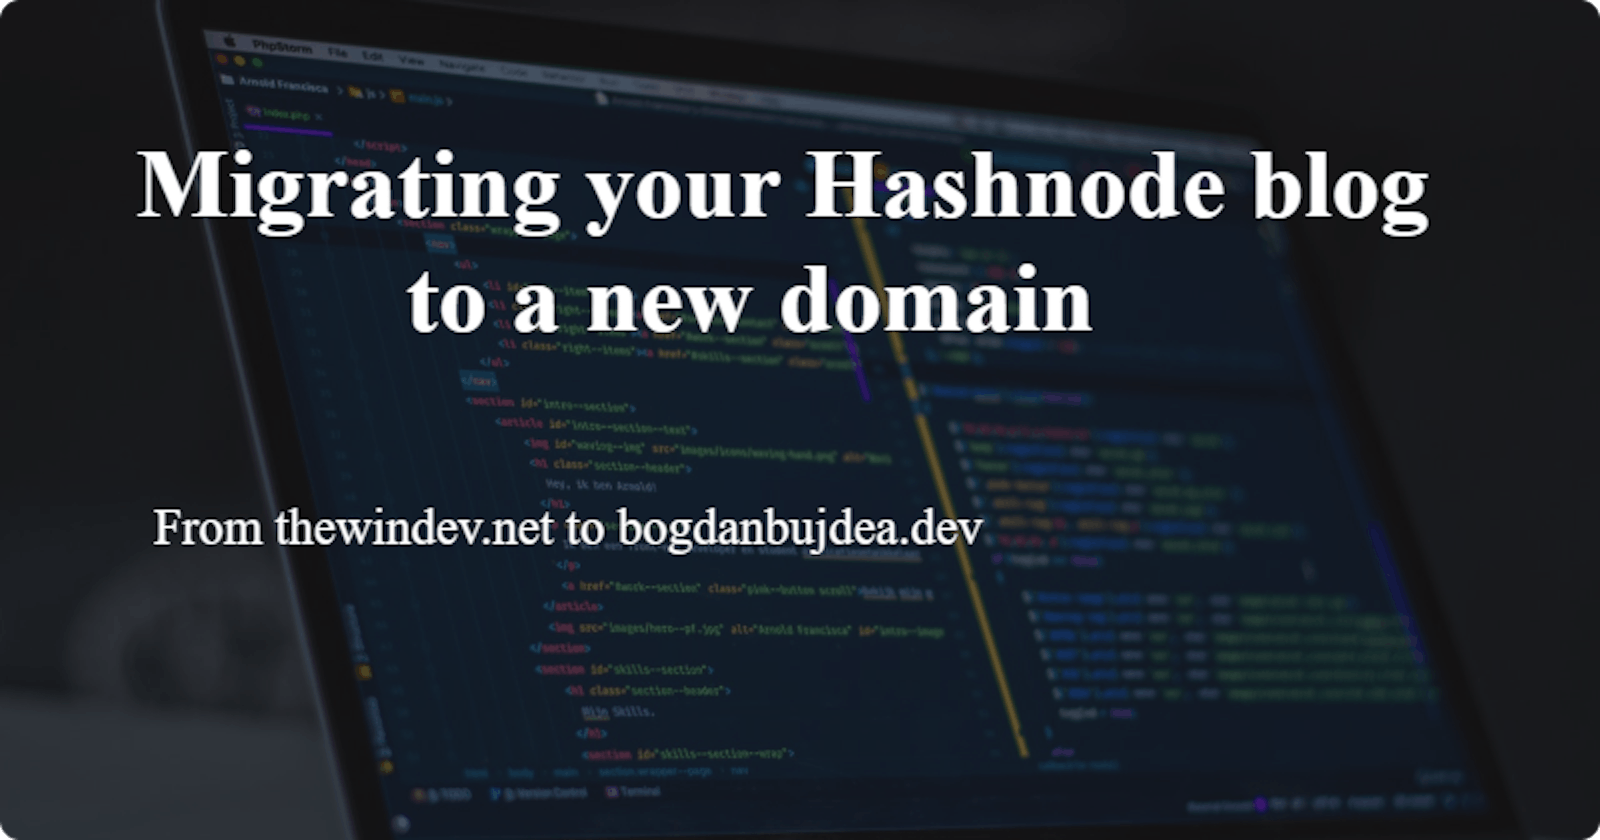 Migrating your Hashnode blog to a new domain